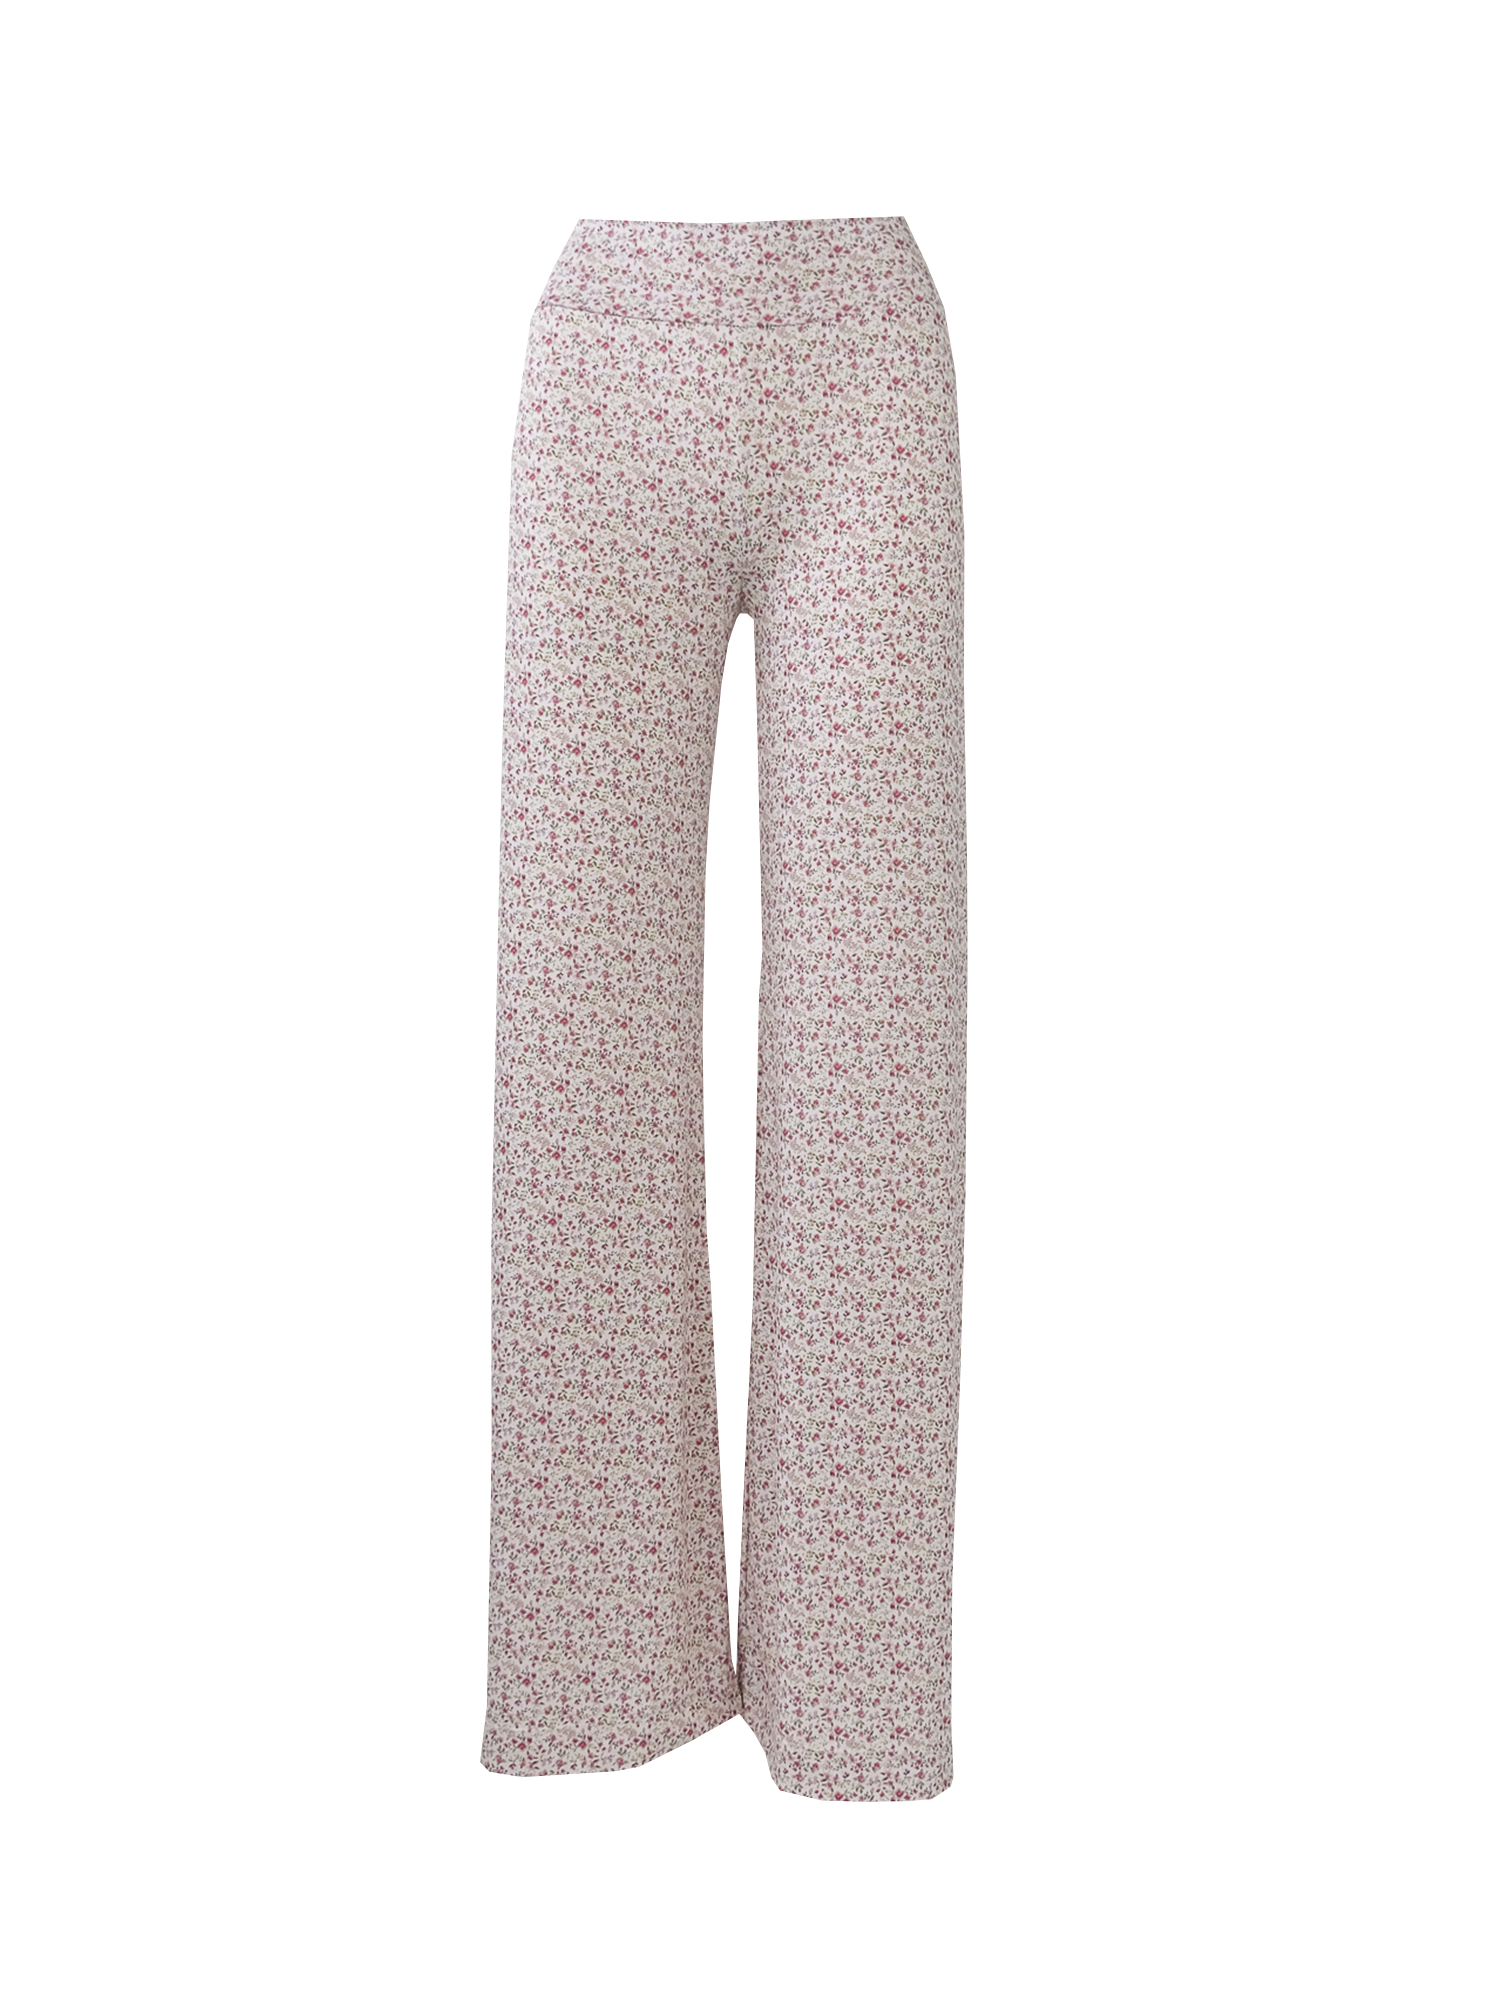 MIMI - trousers in roses lycra